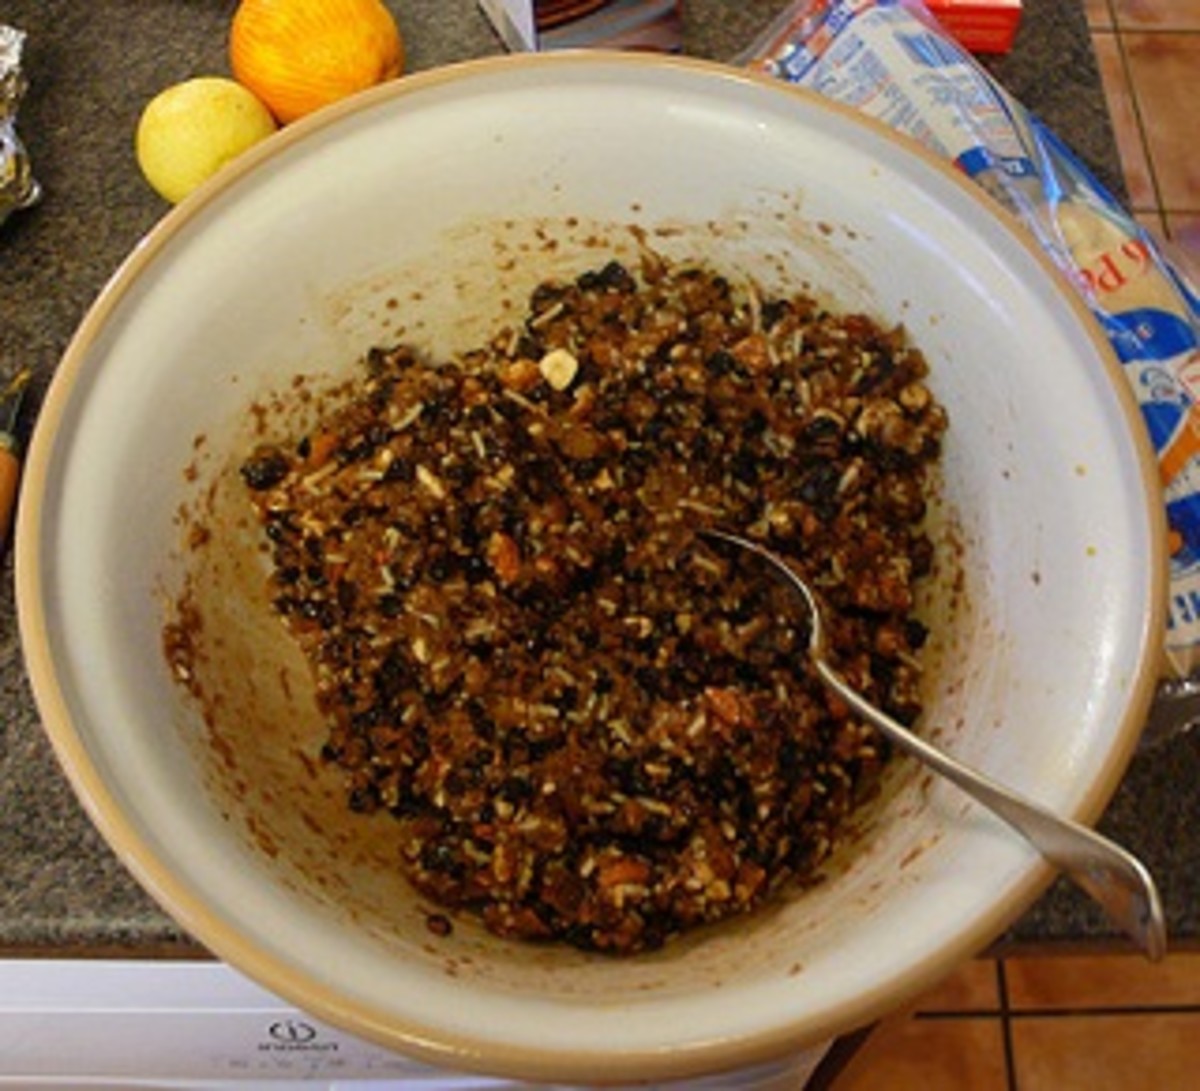 Mixing Christmas pudding ingredients